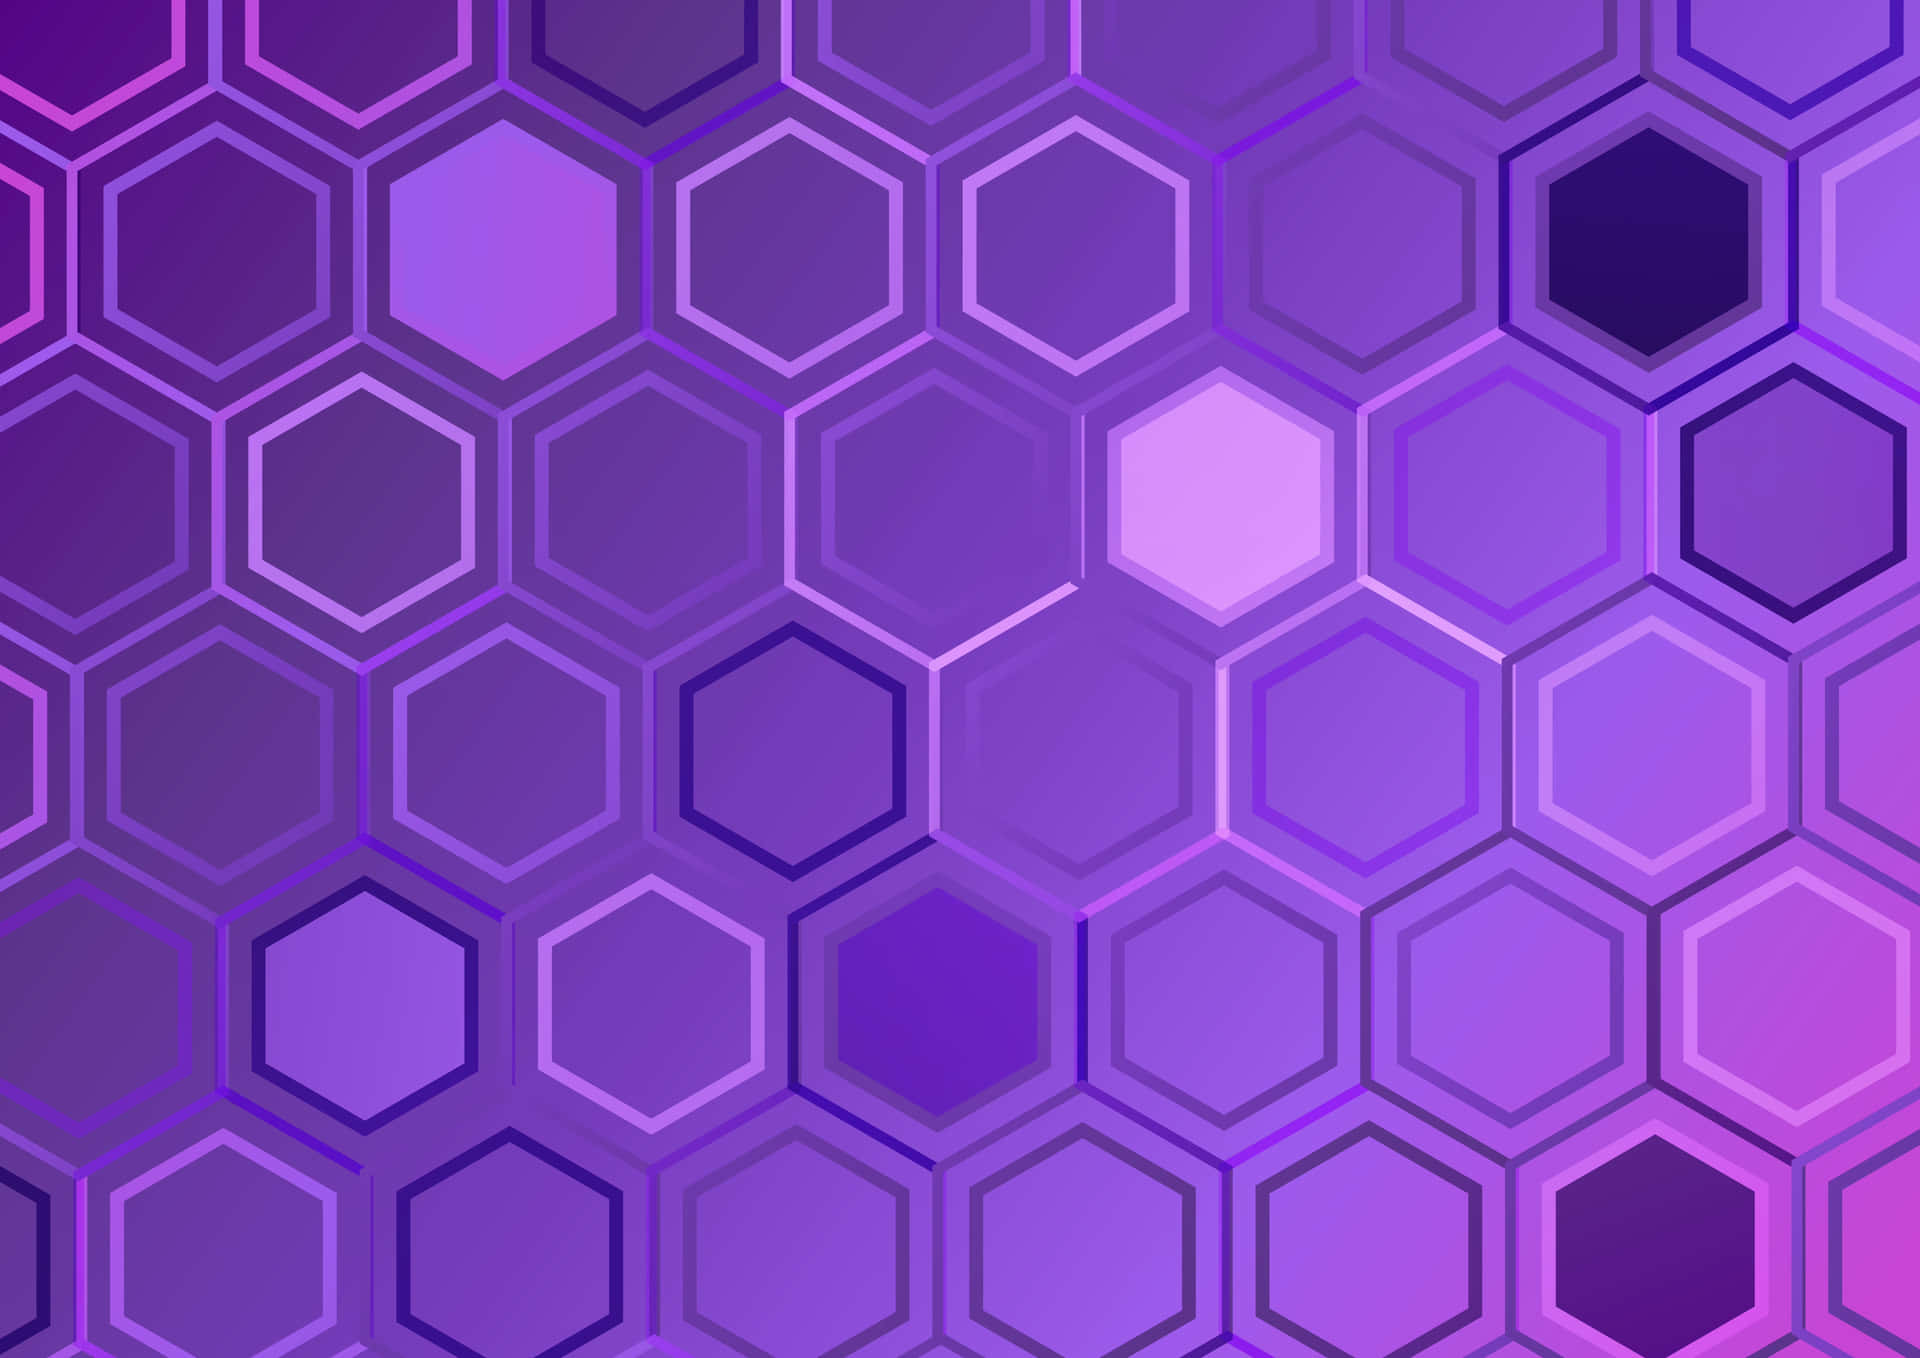 Geometrical pattern of hexagons in dynamic eye-catching colours.